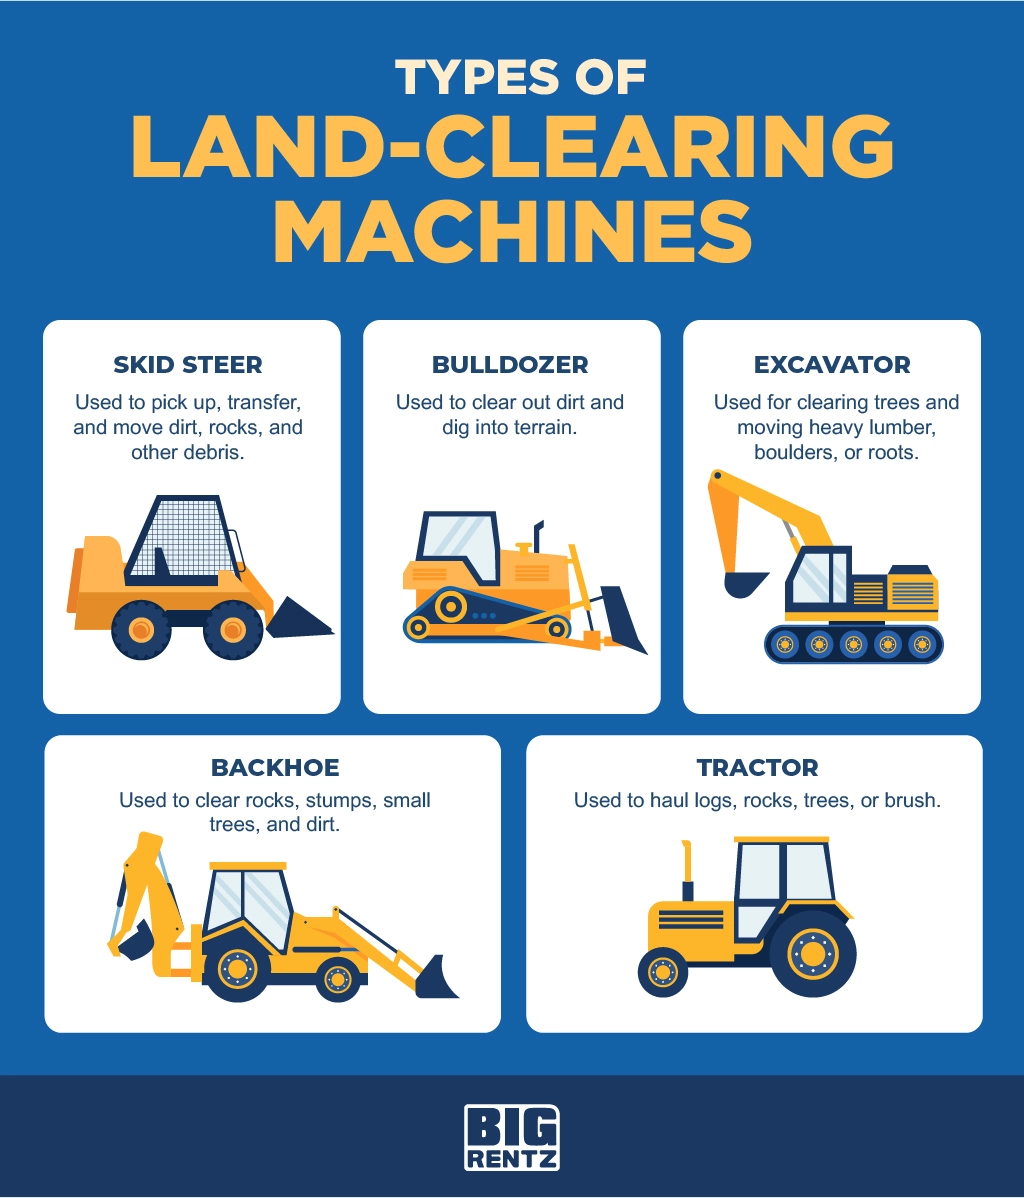 Large Equipment for Land Clearing: Powerhouse Machines